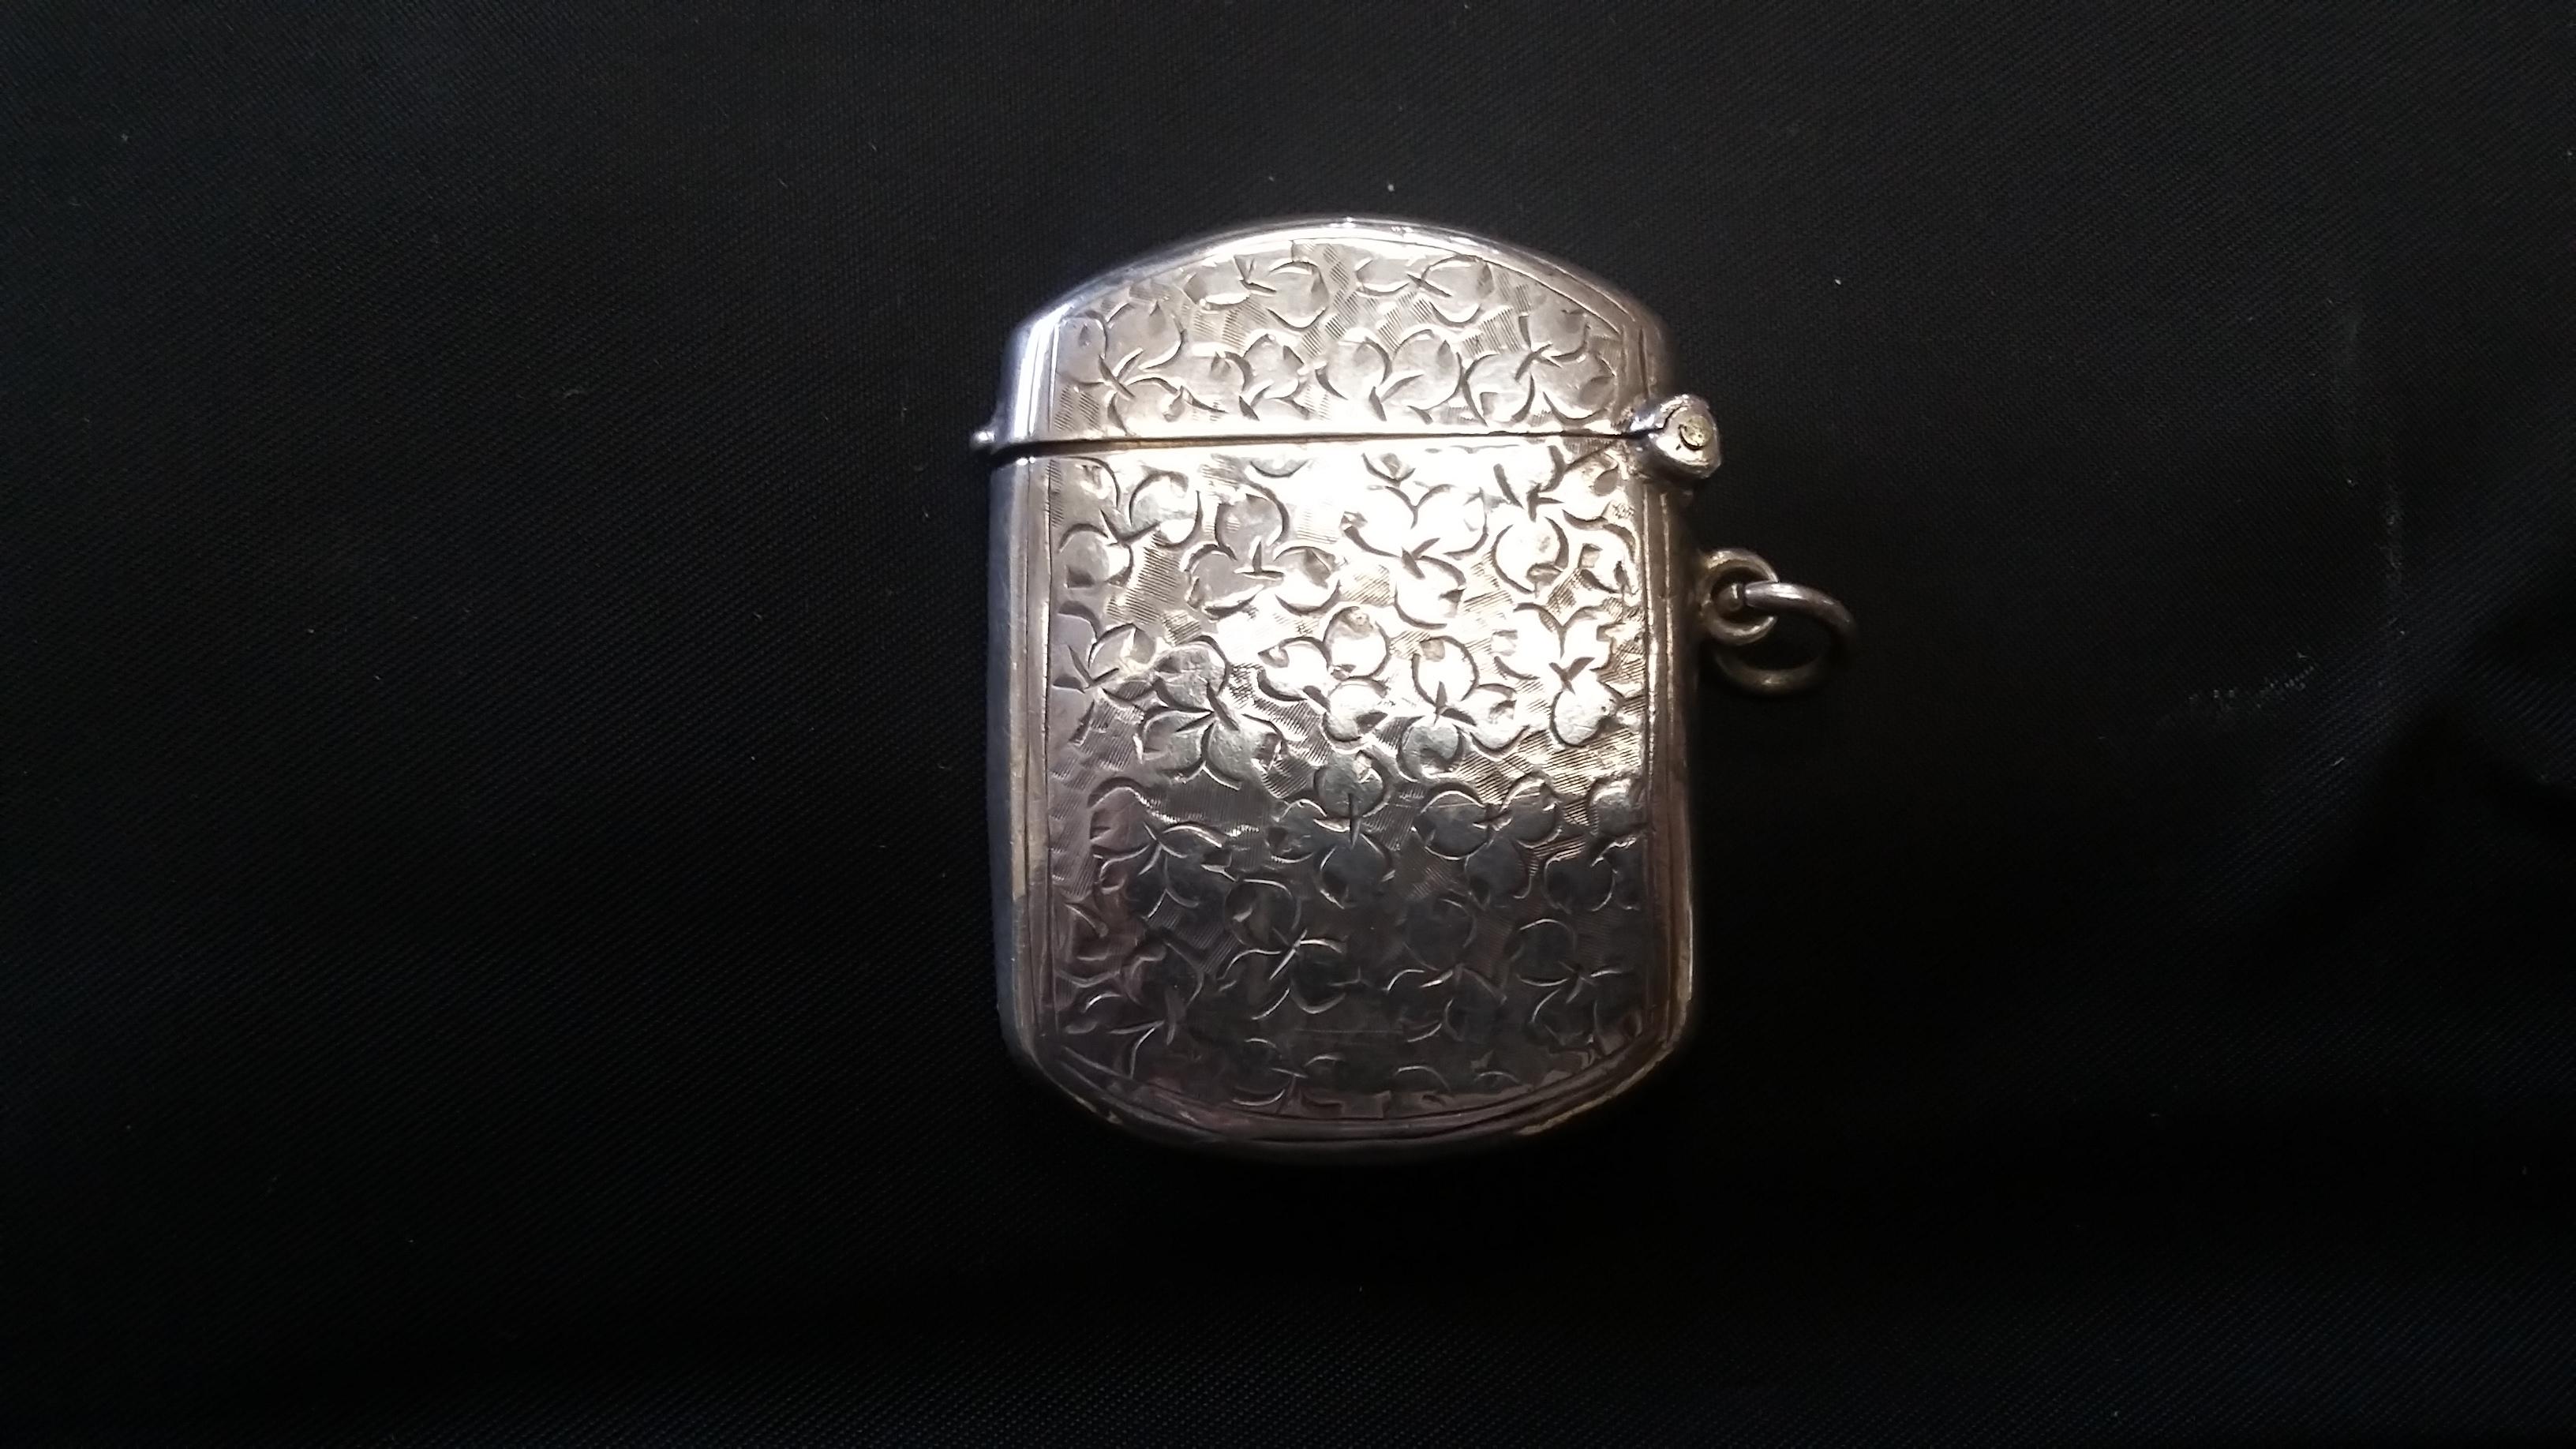 Beautiful and delicate sterling silver match safe holder. From English, circa 1915. Fine details front and back and marked on the inside (see pics). Has a clasp and potentially was worn around the neck. Great craftsmanship.